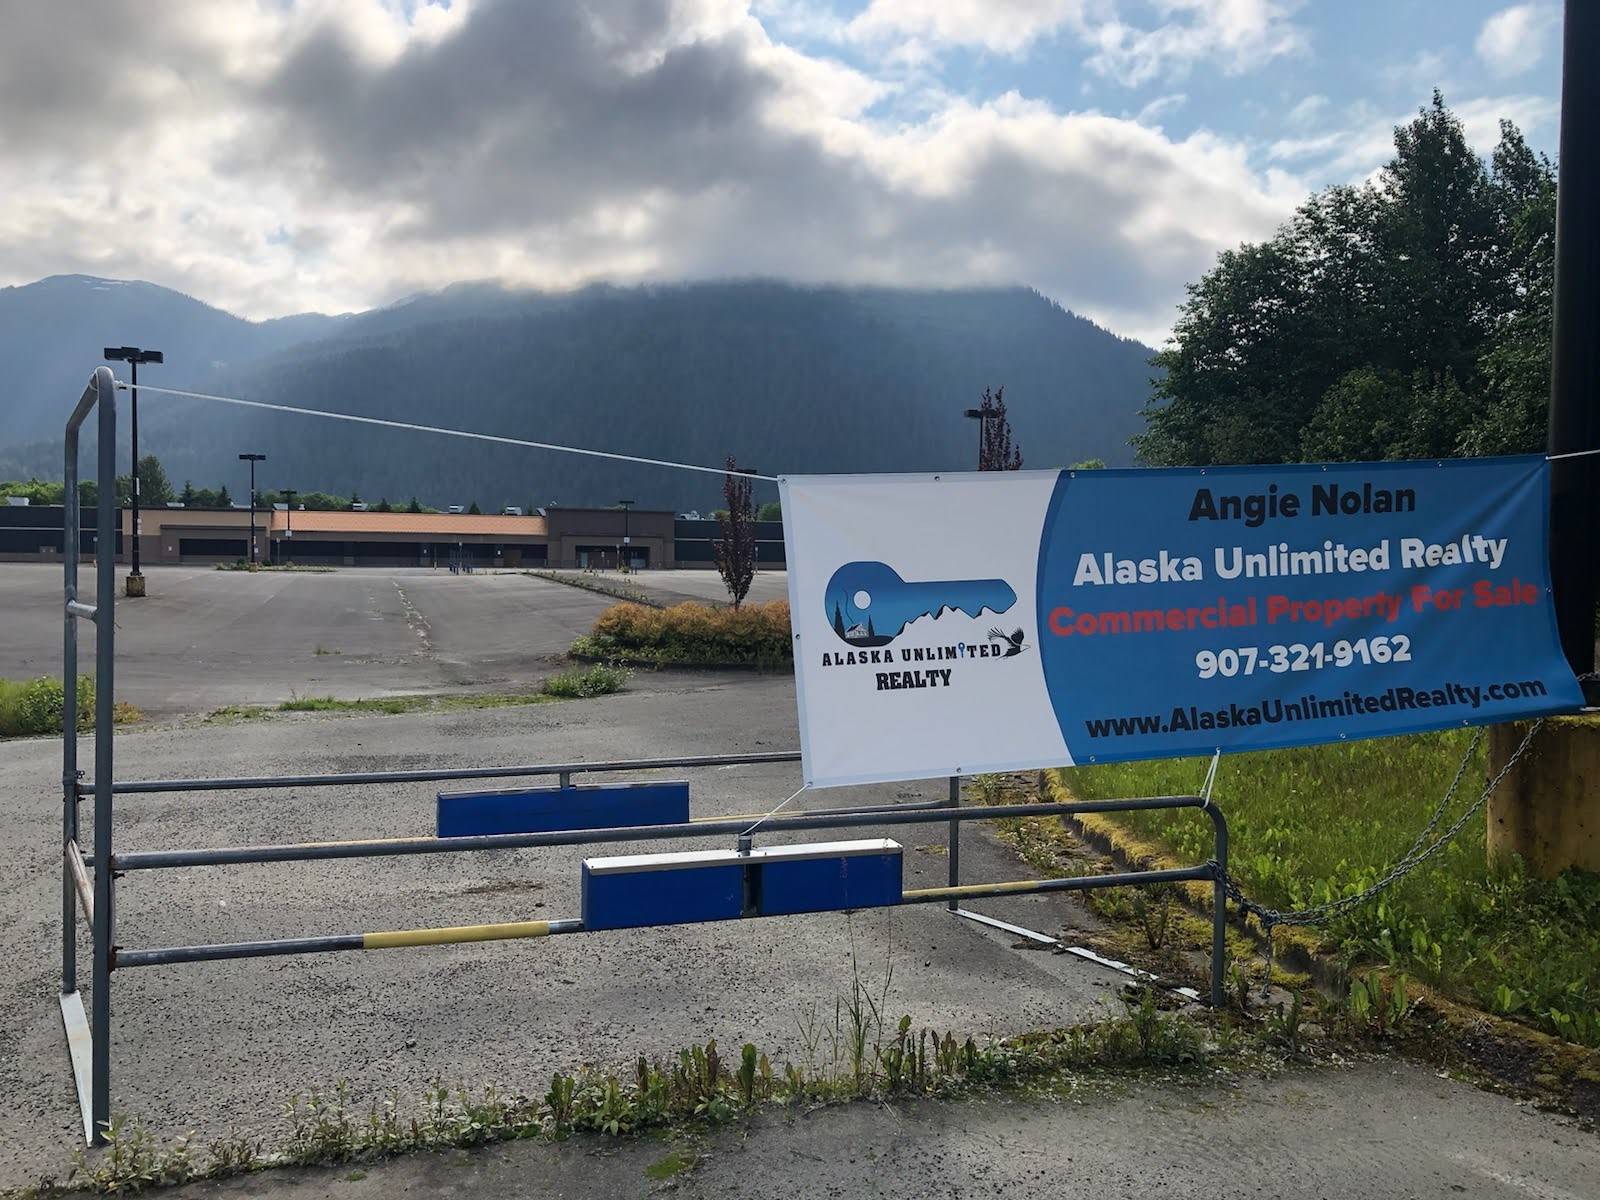 The former Walmart building, shown in this July 1 photo, located in the Lemon Creek area is for sale at a price about $2.3 million below its assessed value. (Peter Segall | Juneau Empire)